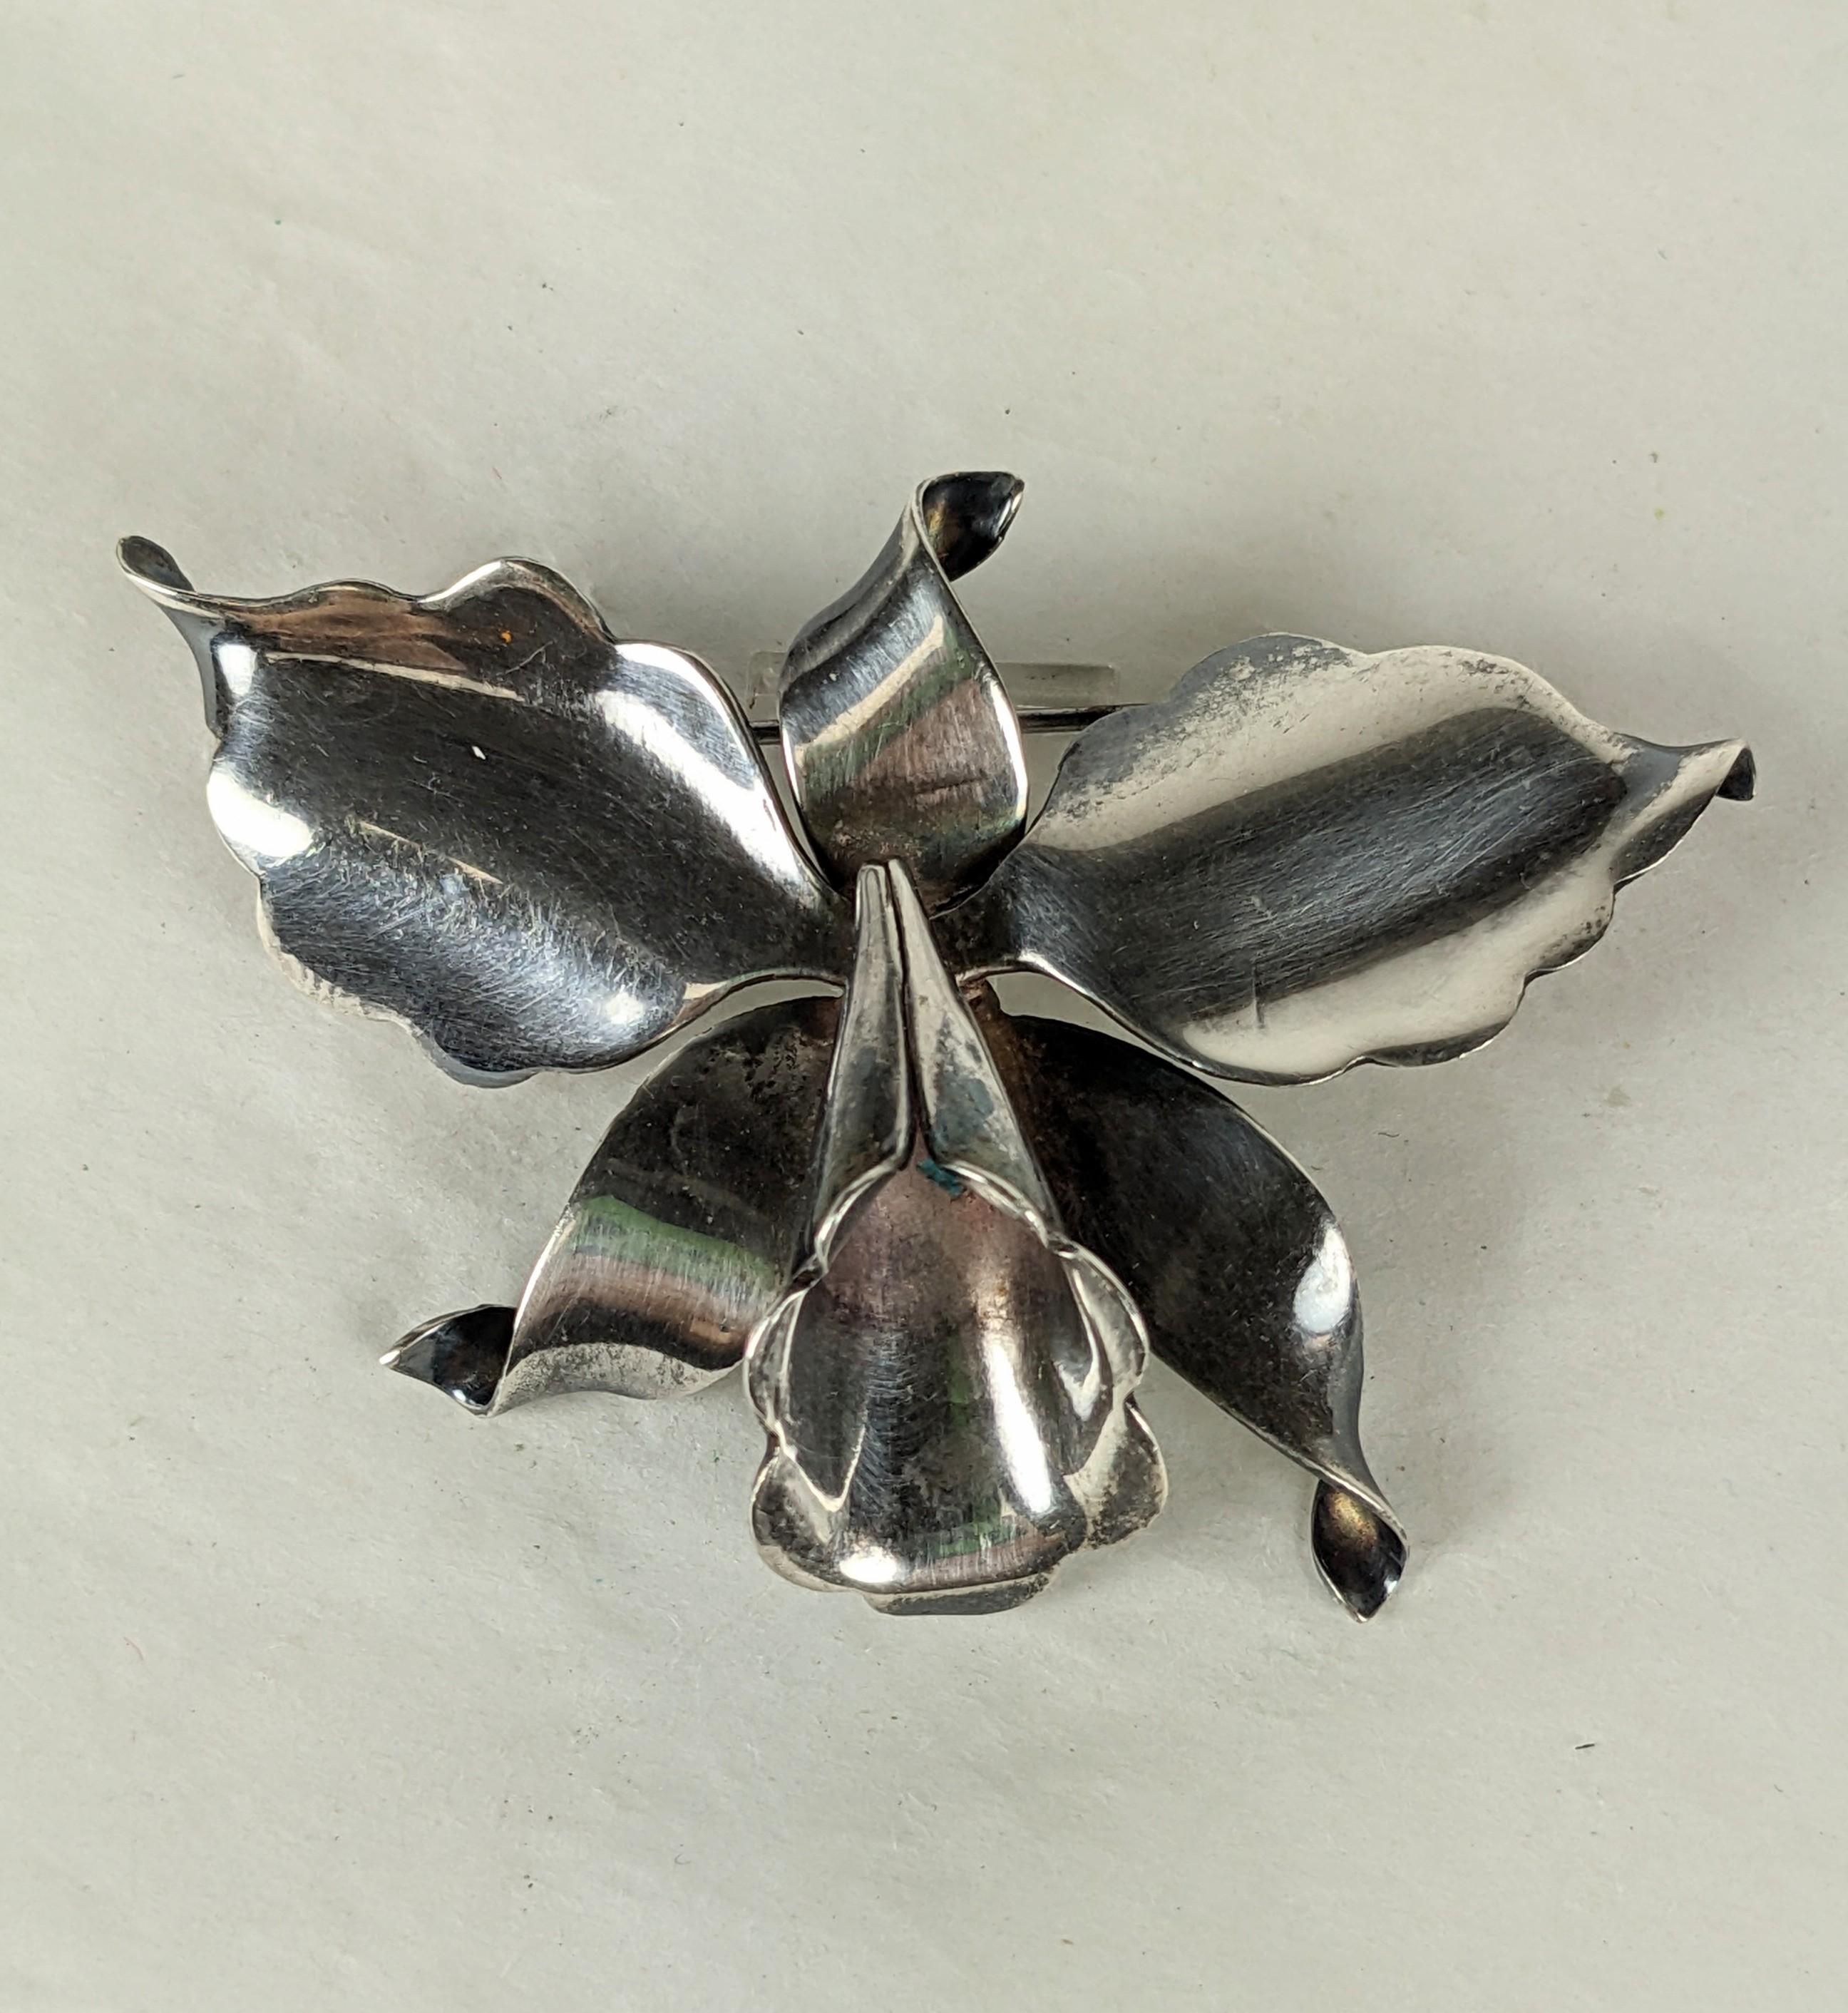 Lovely Antonio Sterling Orchid Brooch from the 1940's. Hand made in sterling sheet metal with early hallmark. 940 standard silver (higher than sterling). 1940's Mexico. 2.5